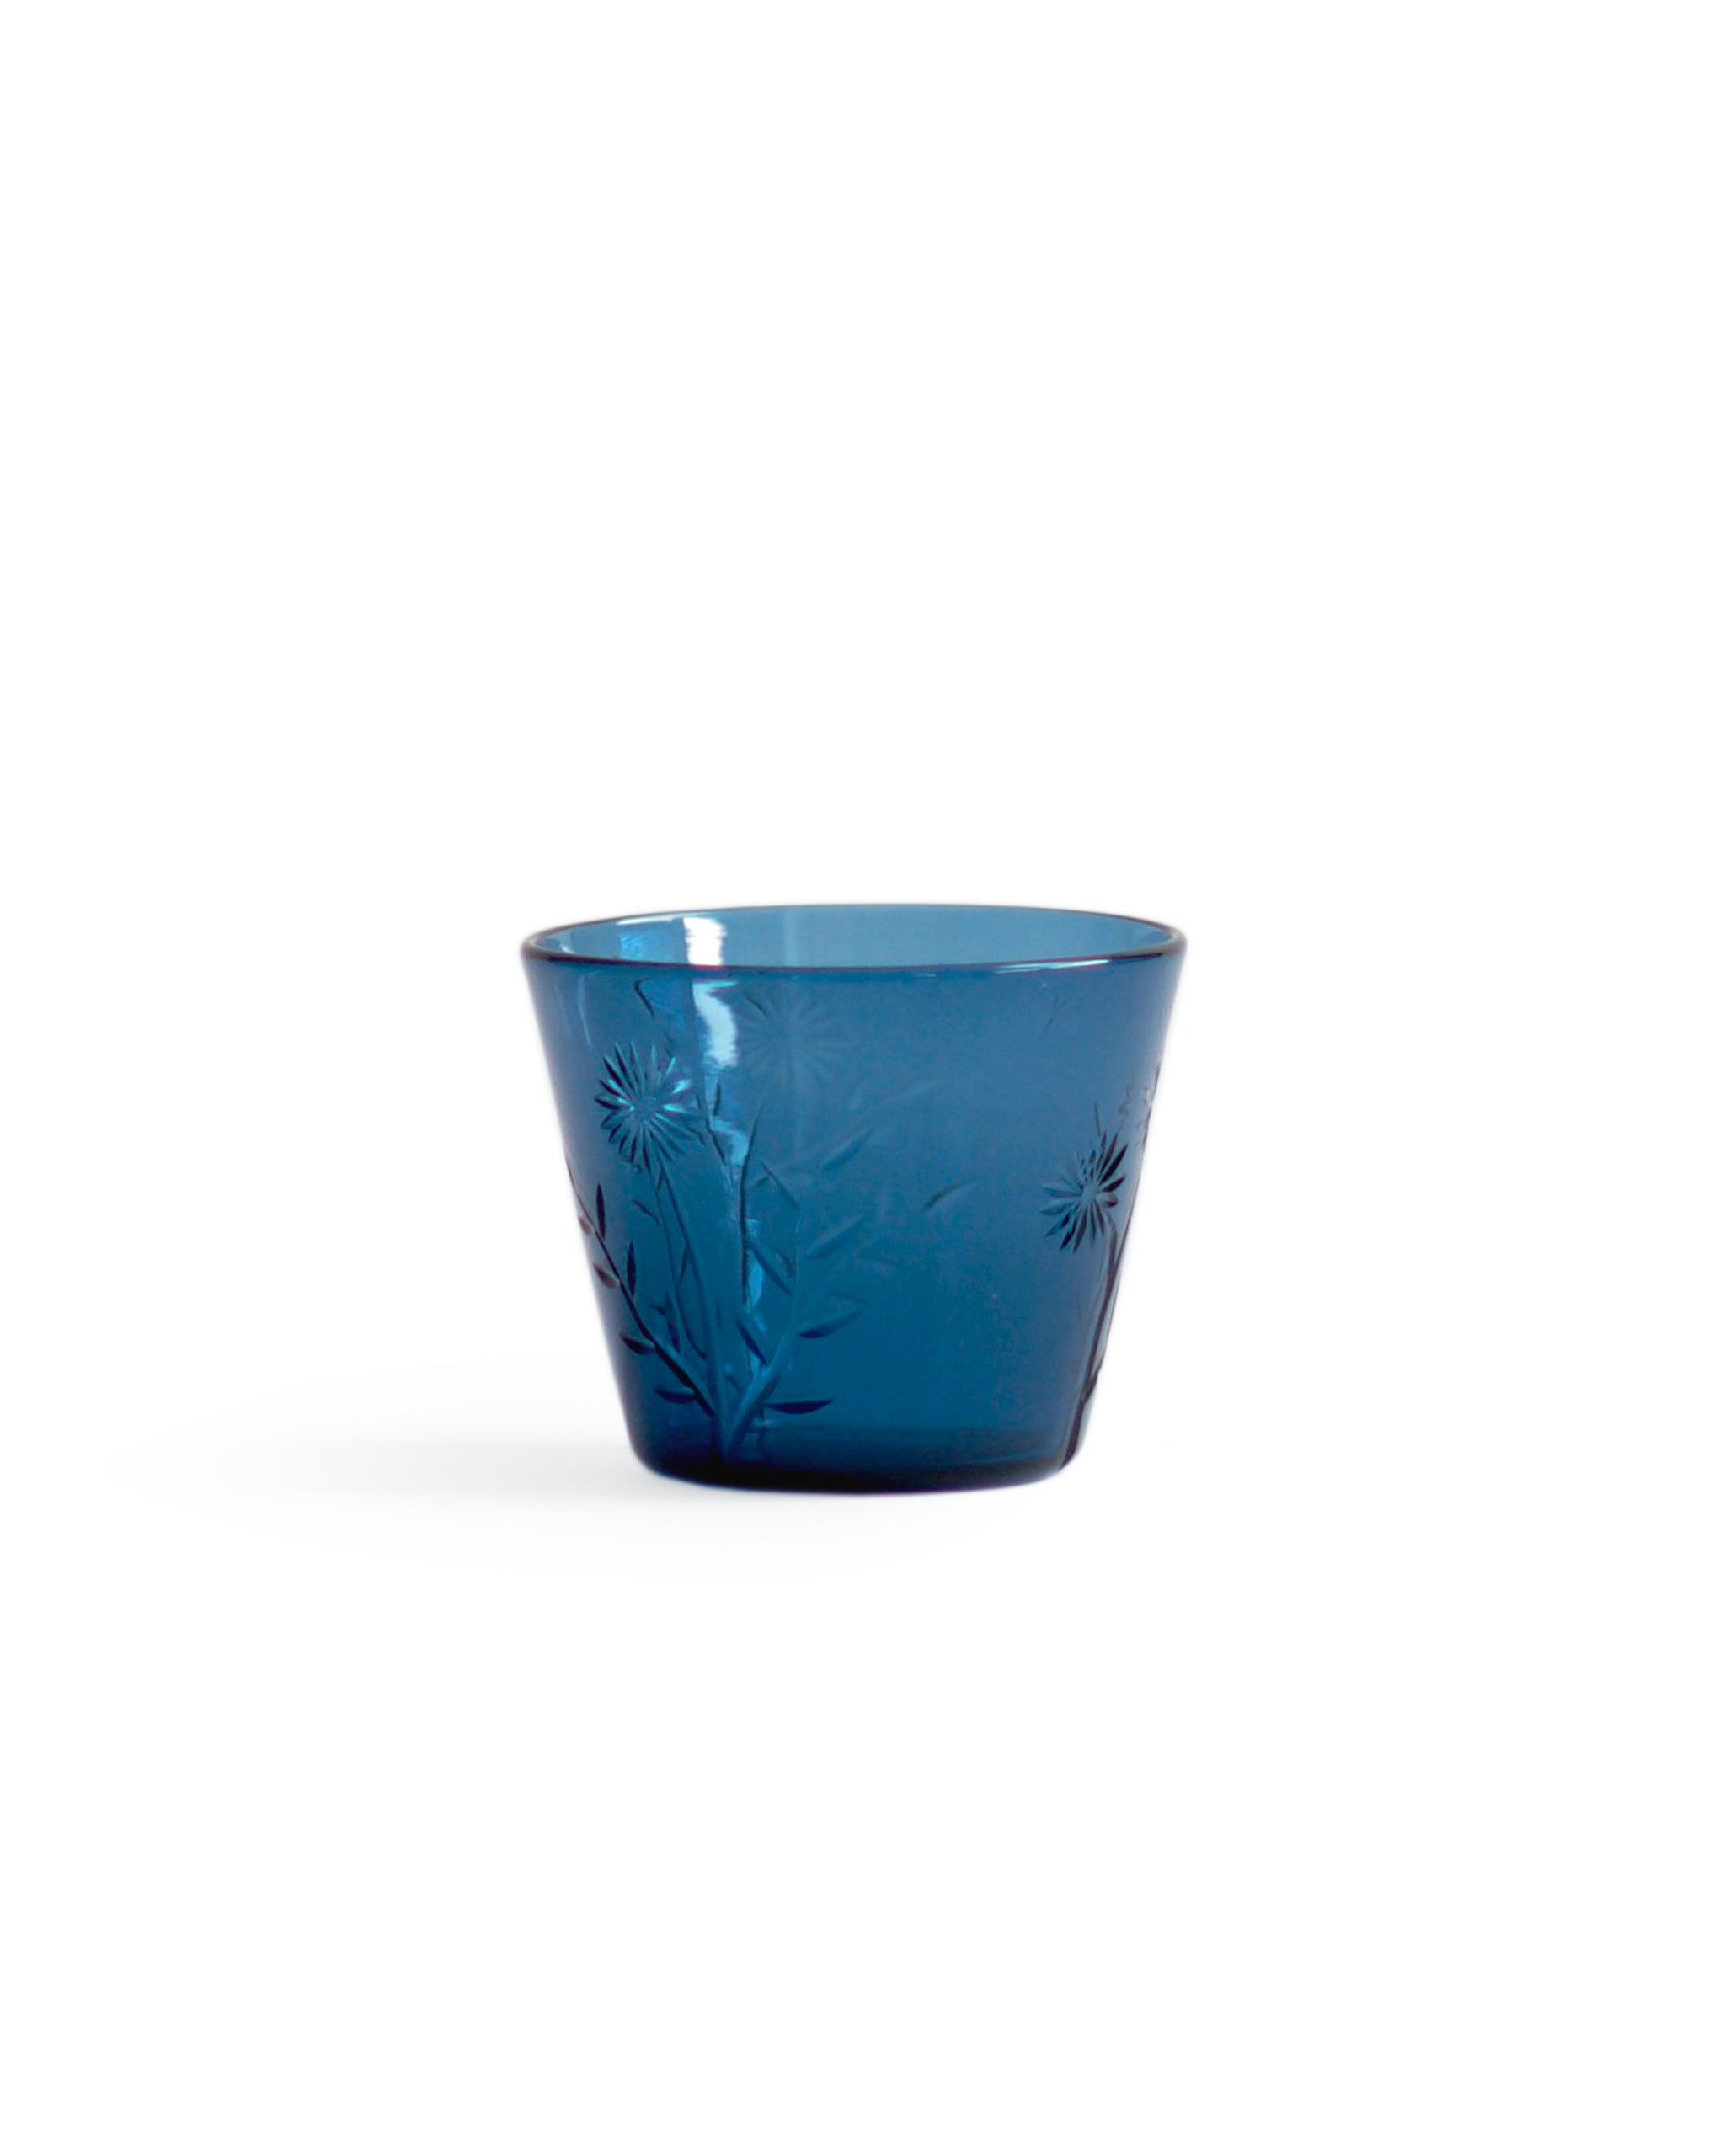 Silhouetted reclaimed blue ms.garden daily cup by factory zoomer against white background.